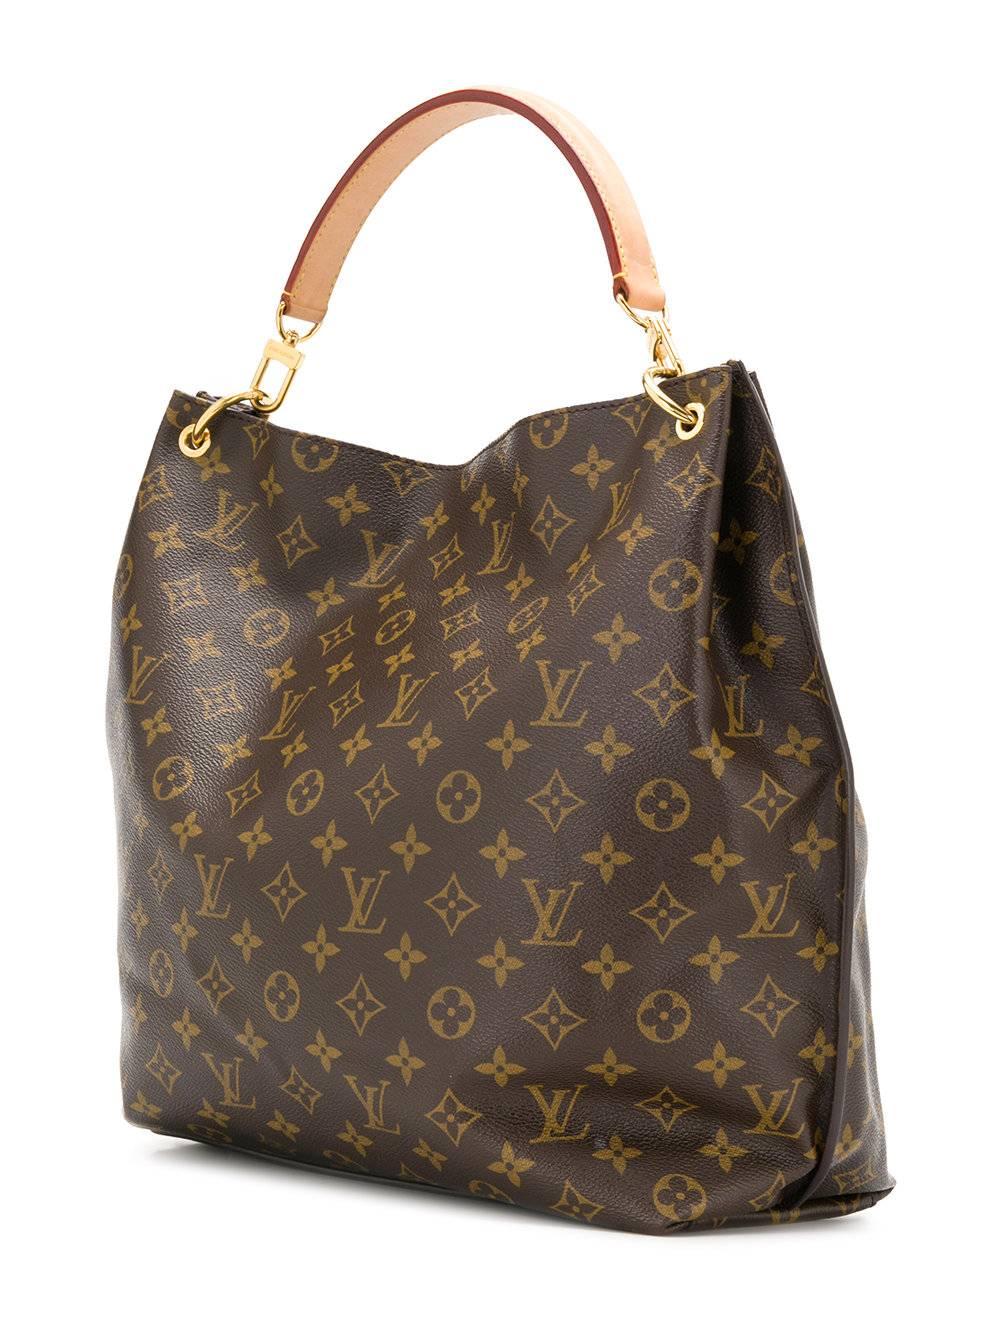 Crafted in the iconic brown monogram canvas print, this luxurious leather tote bag by Louis Vuitton features a wide open-top design, a front flap pocket accented by the brands signature S-Lock closure in gold-tone hardware and a removable vachetta